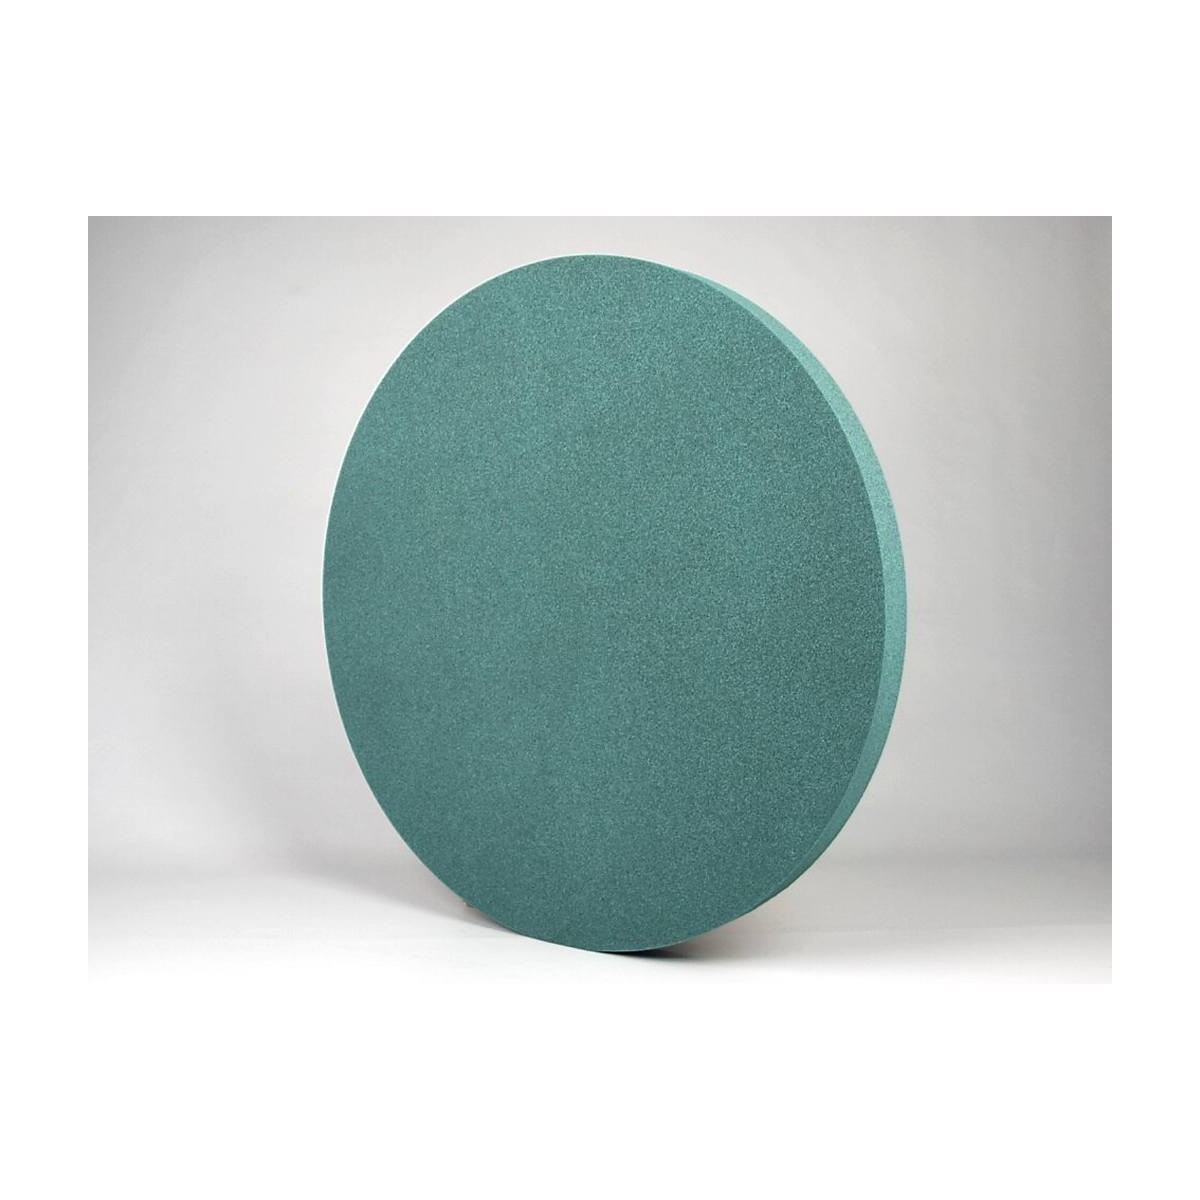 circulo acustico Eliacoustic Circle Pure turquoise